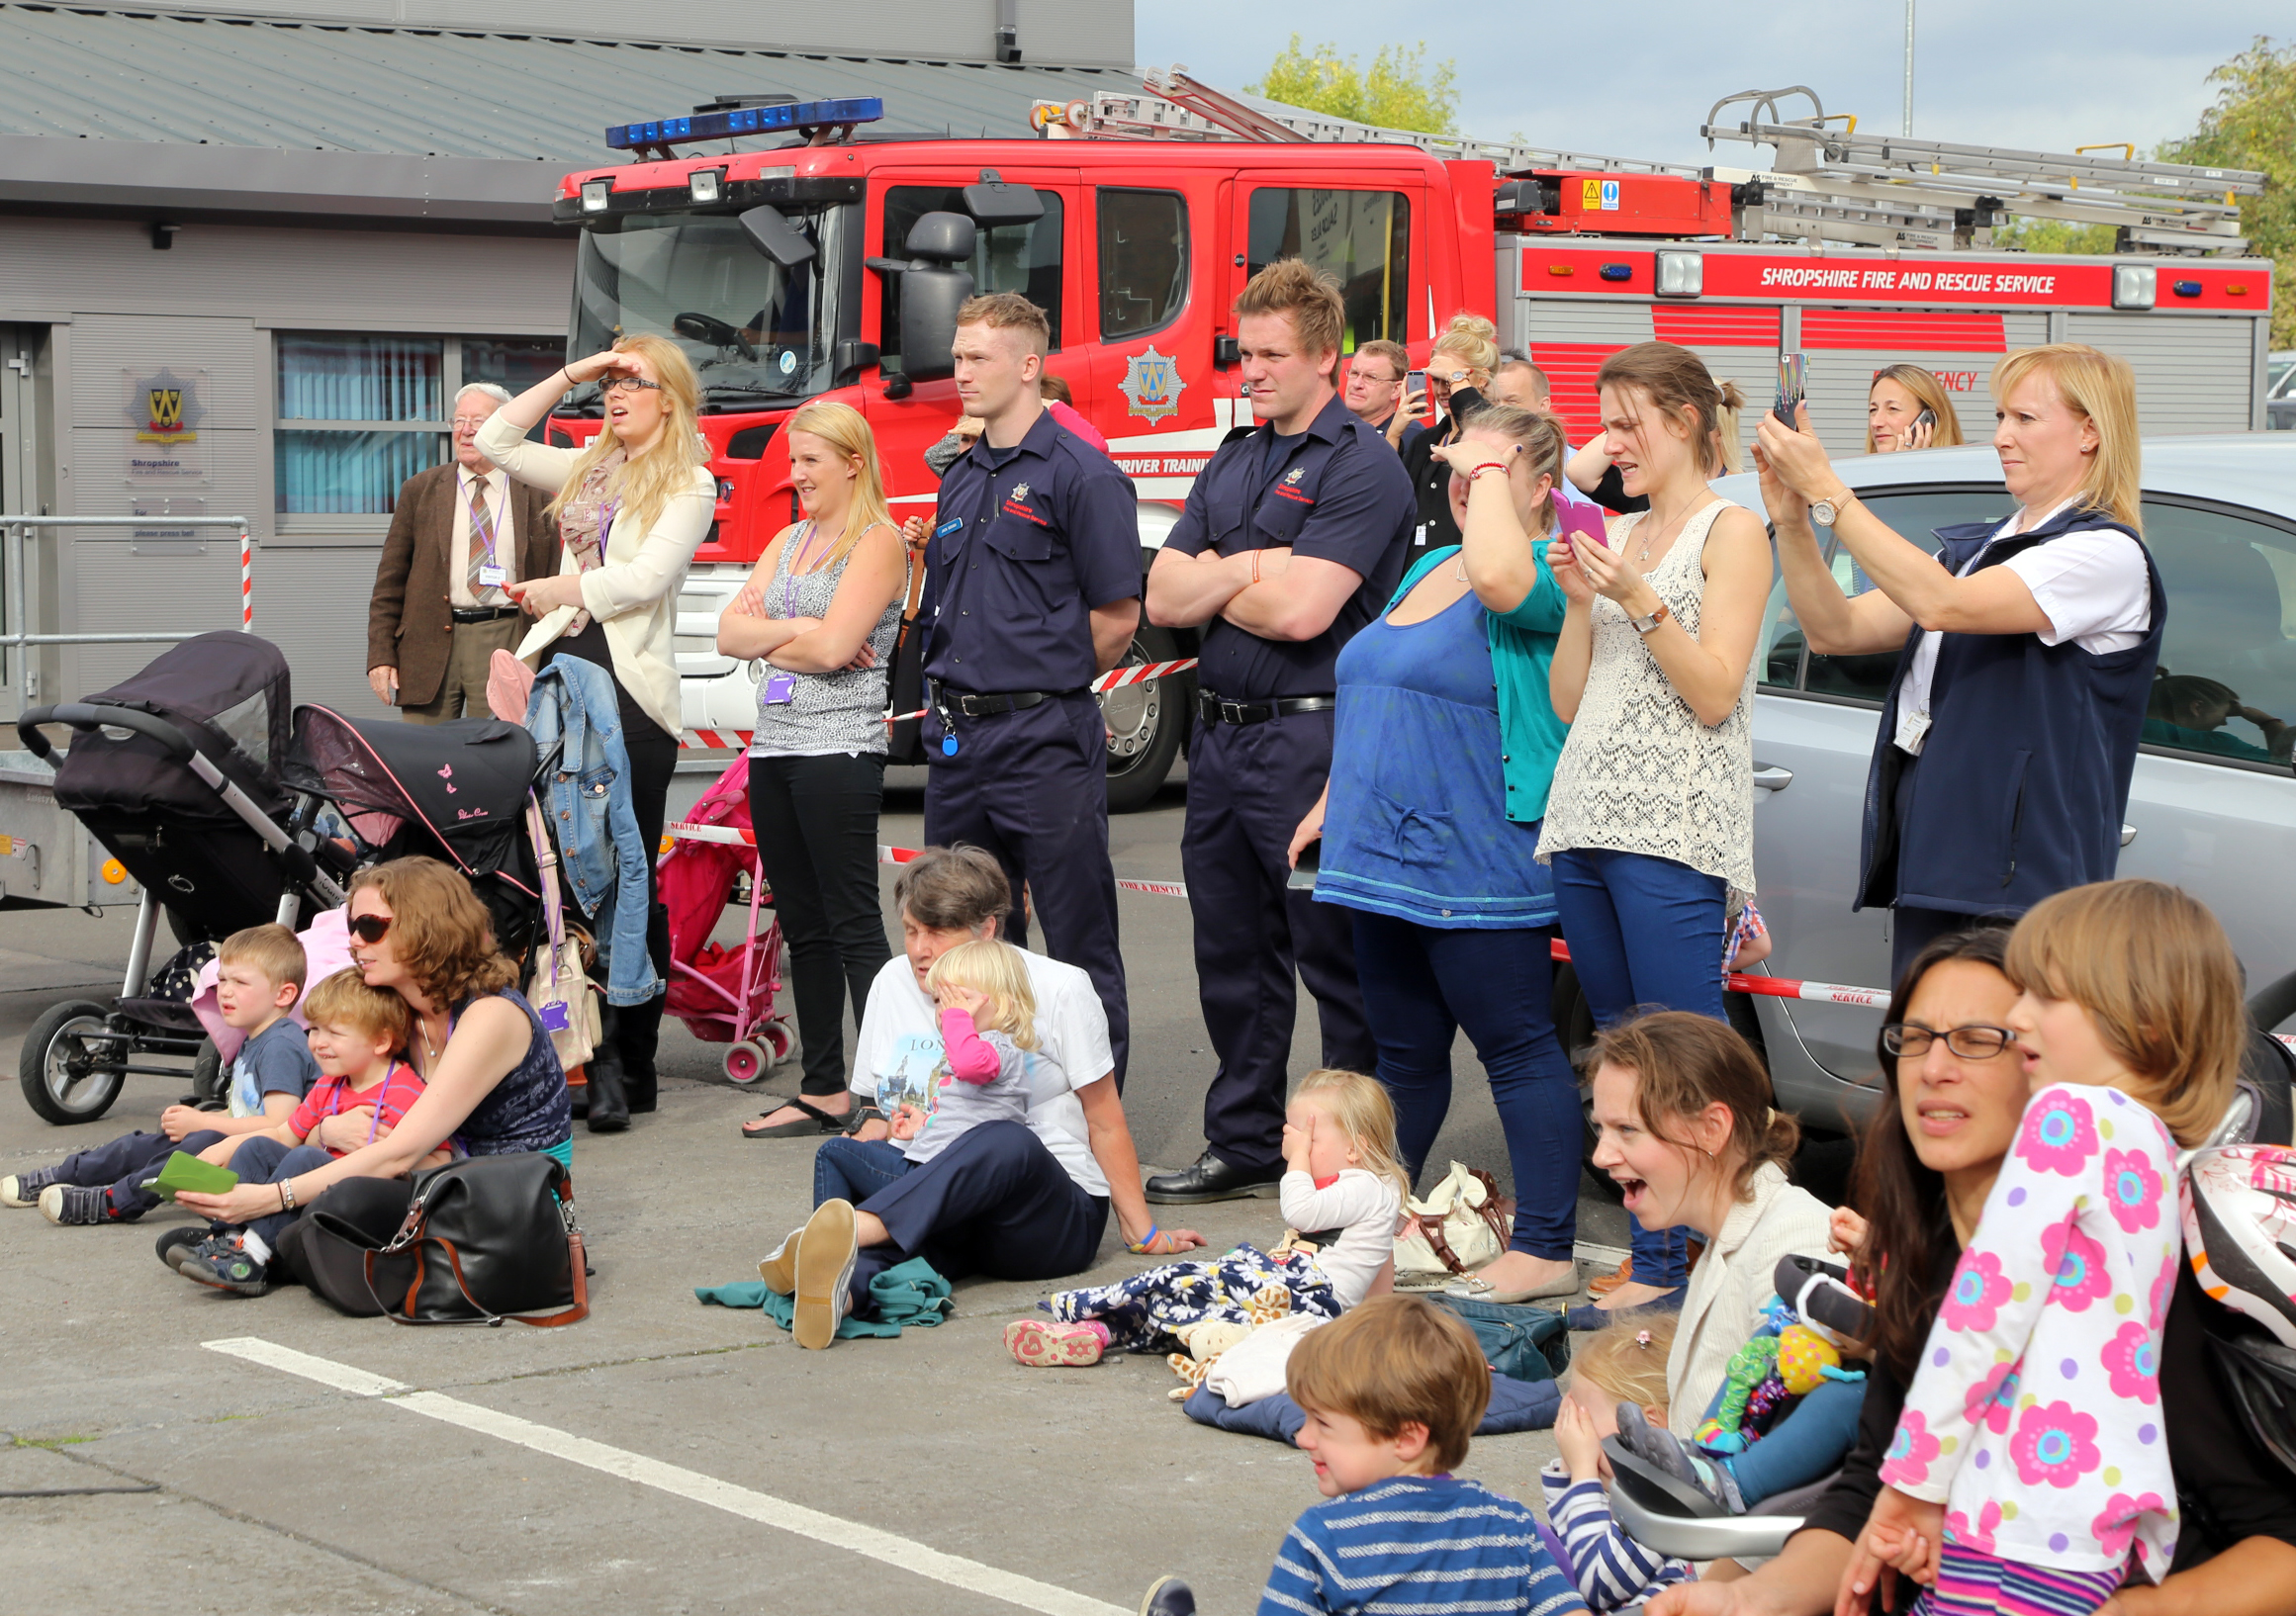 Everyone is safely behind the line to watch the eye catching chip pan fire demonstration.